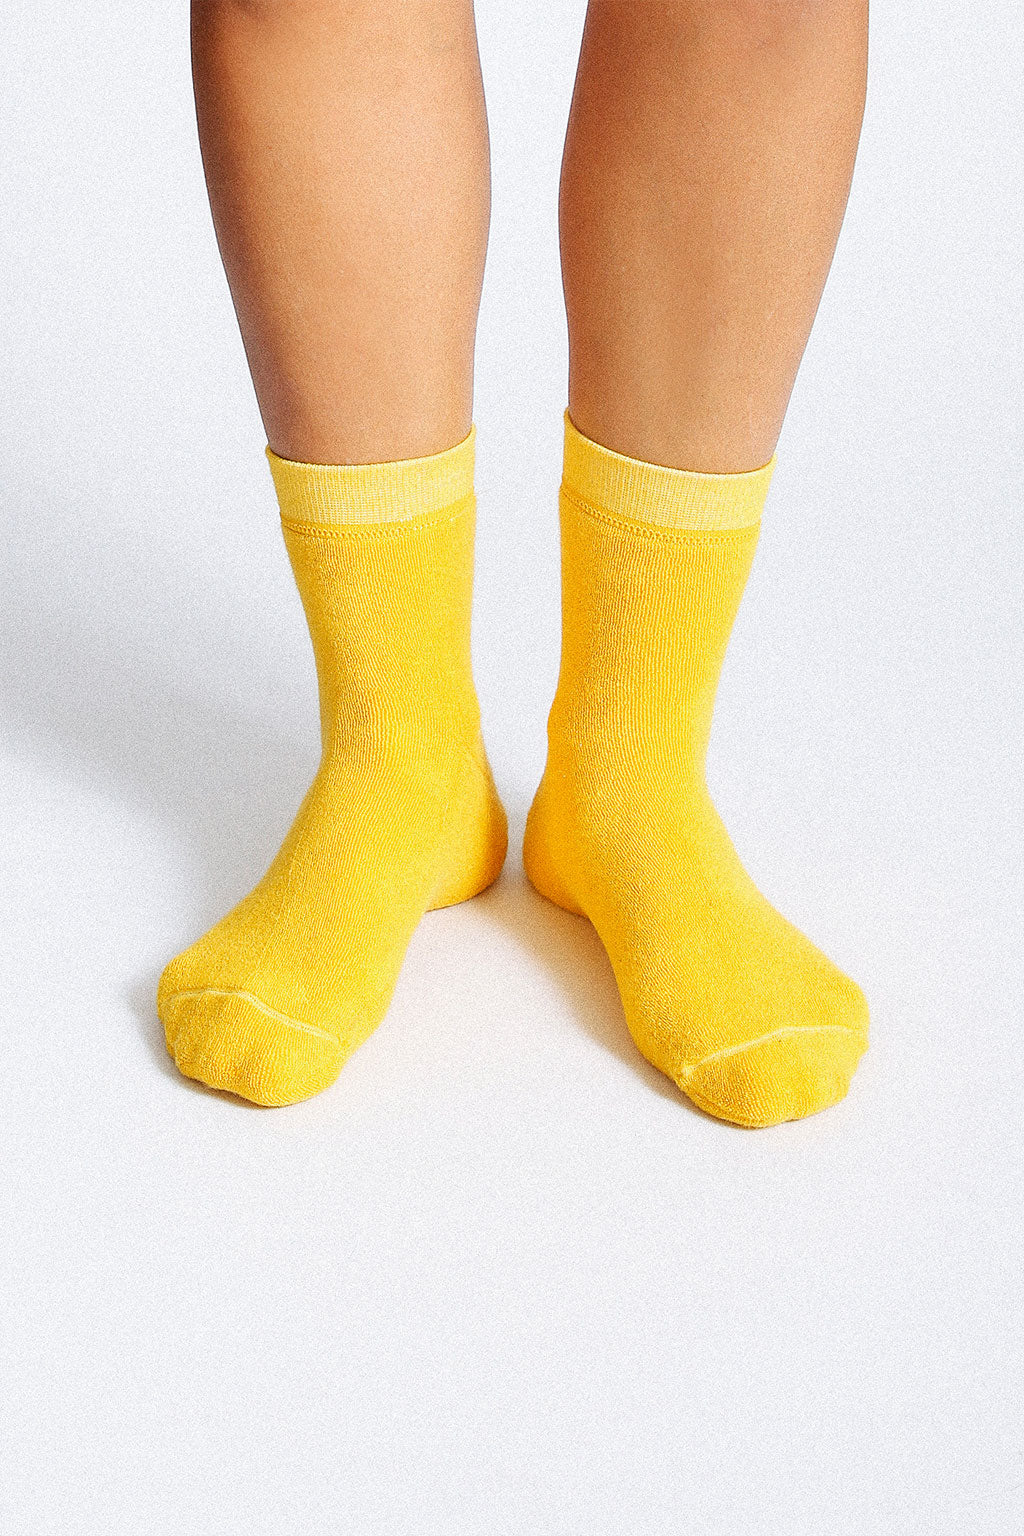 Tailored Union Terry soft yellow ankles